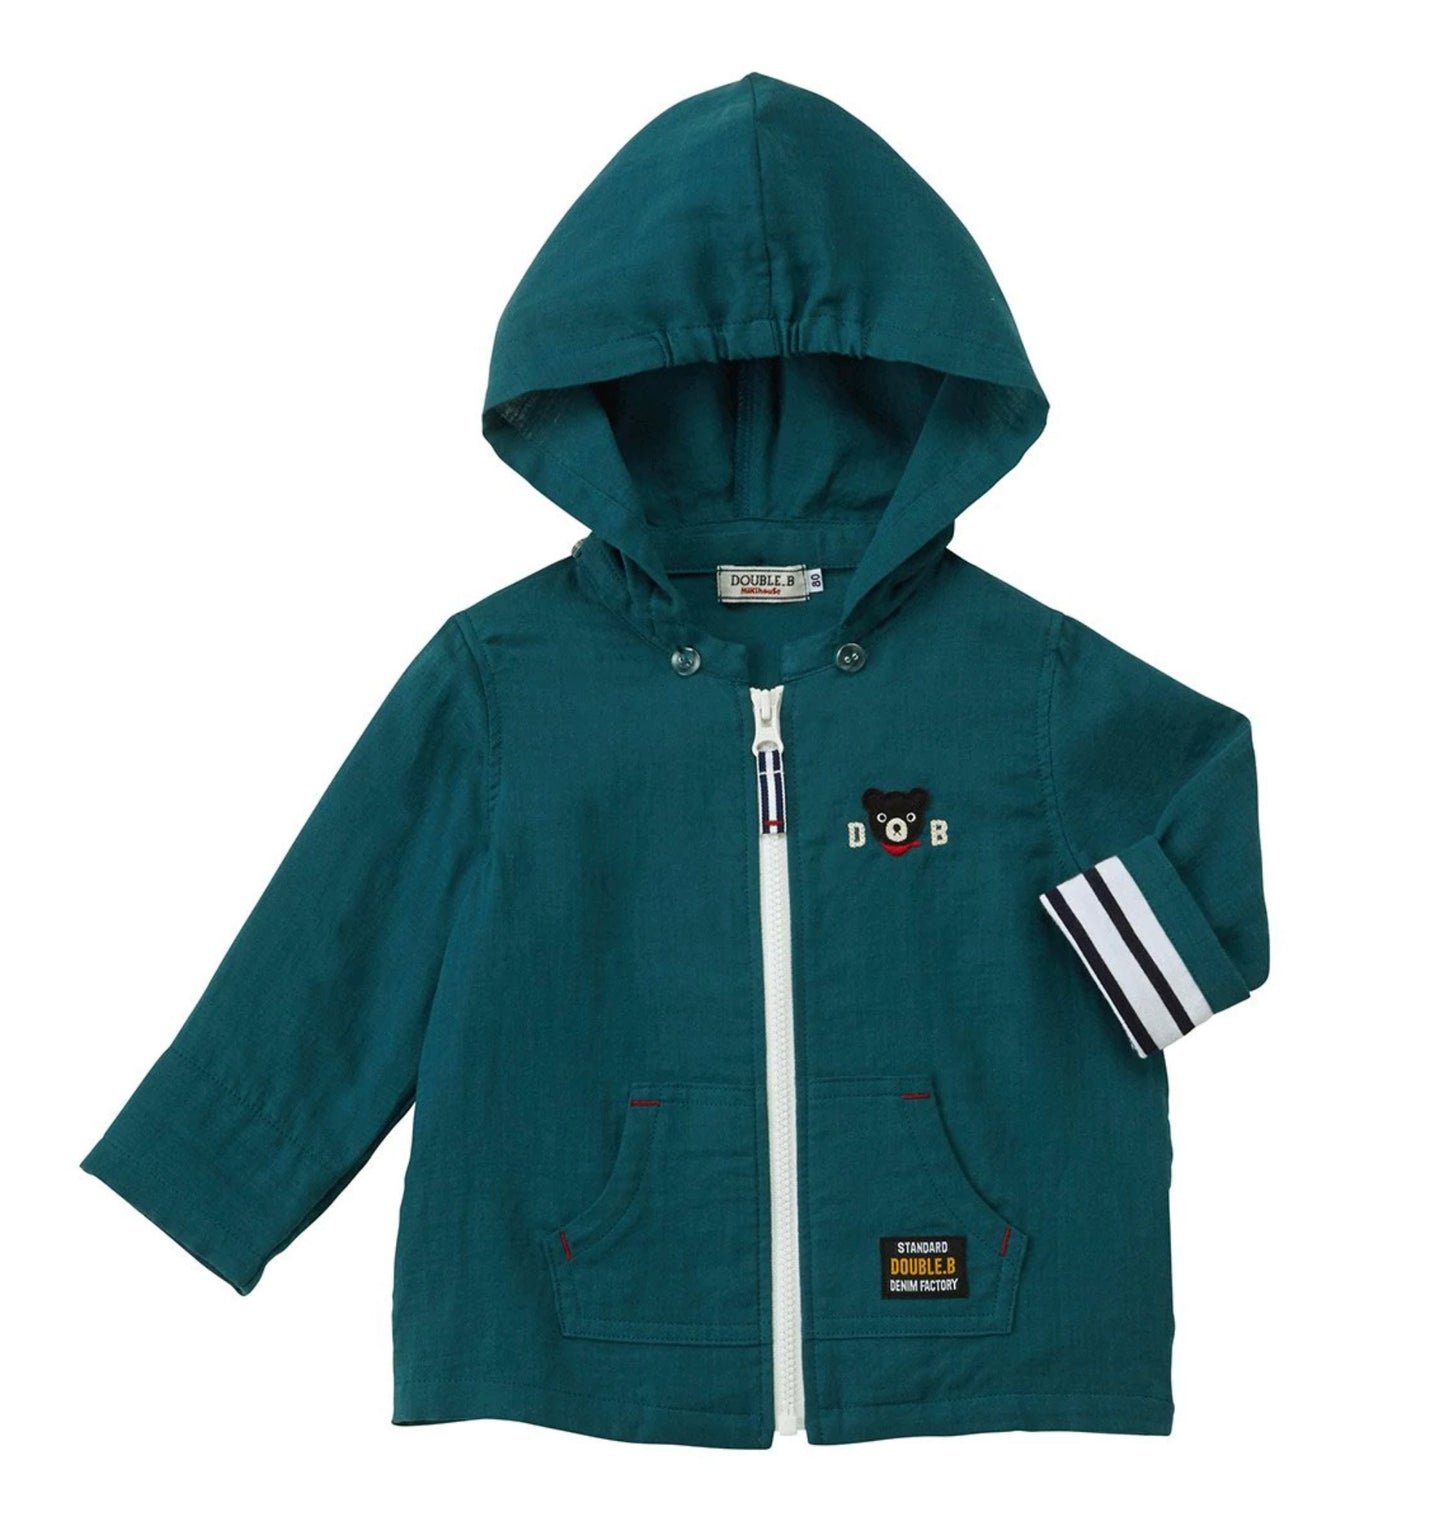 [4y] MikiHouse Double B Light Green Jacket